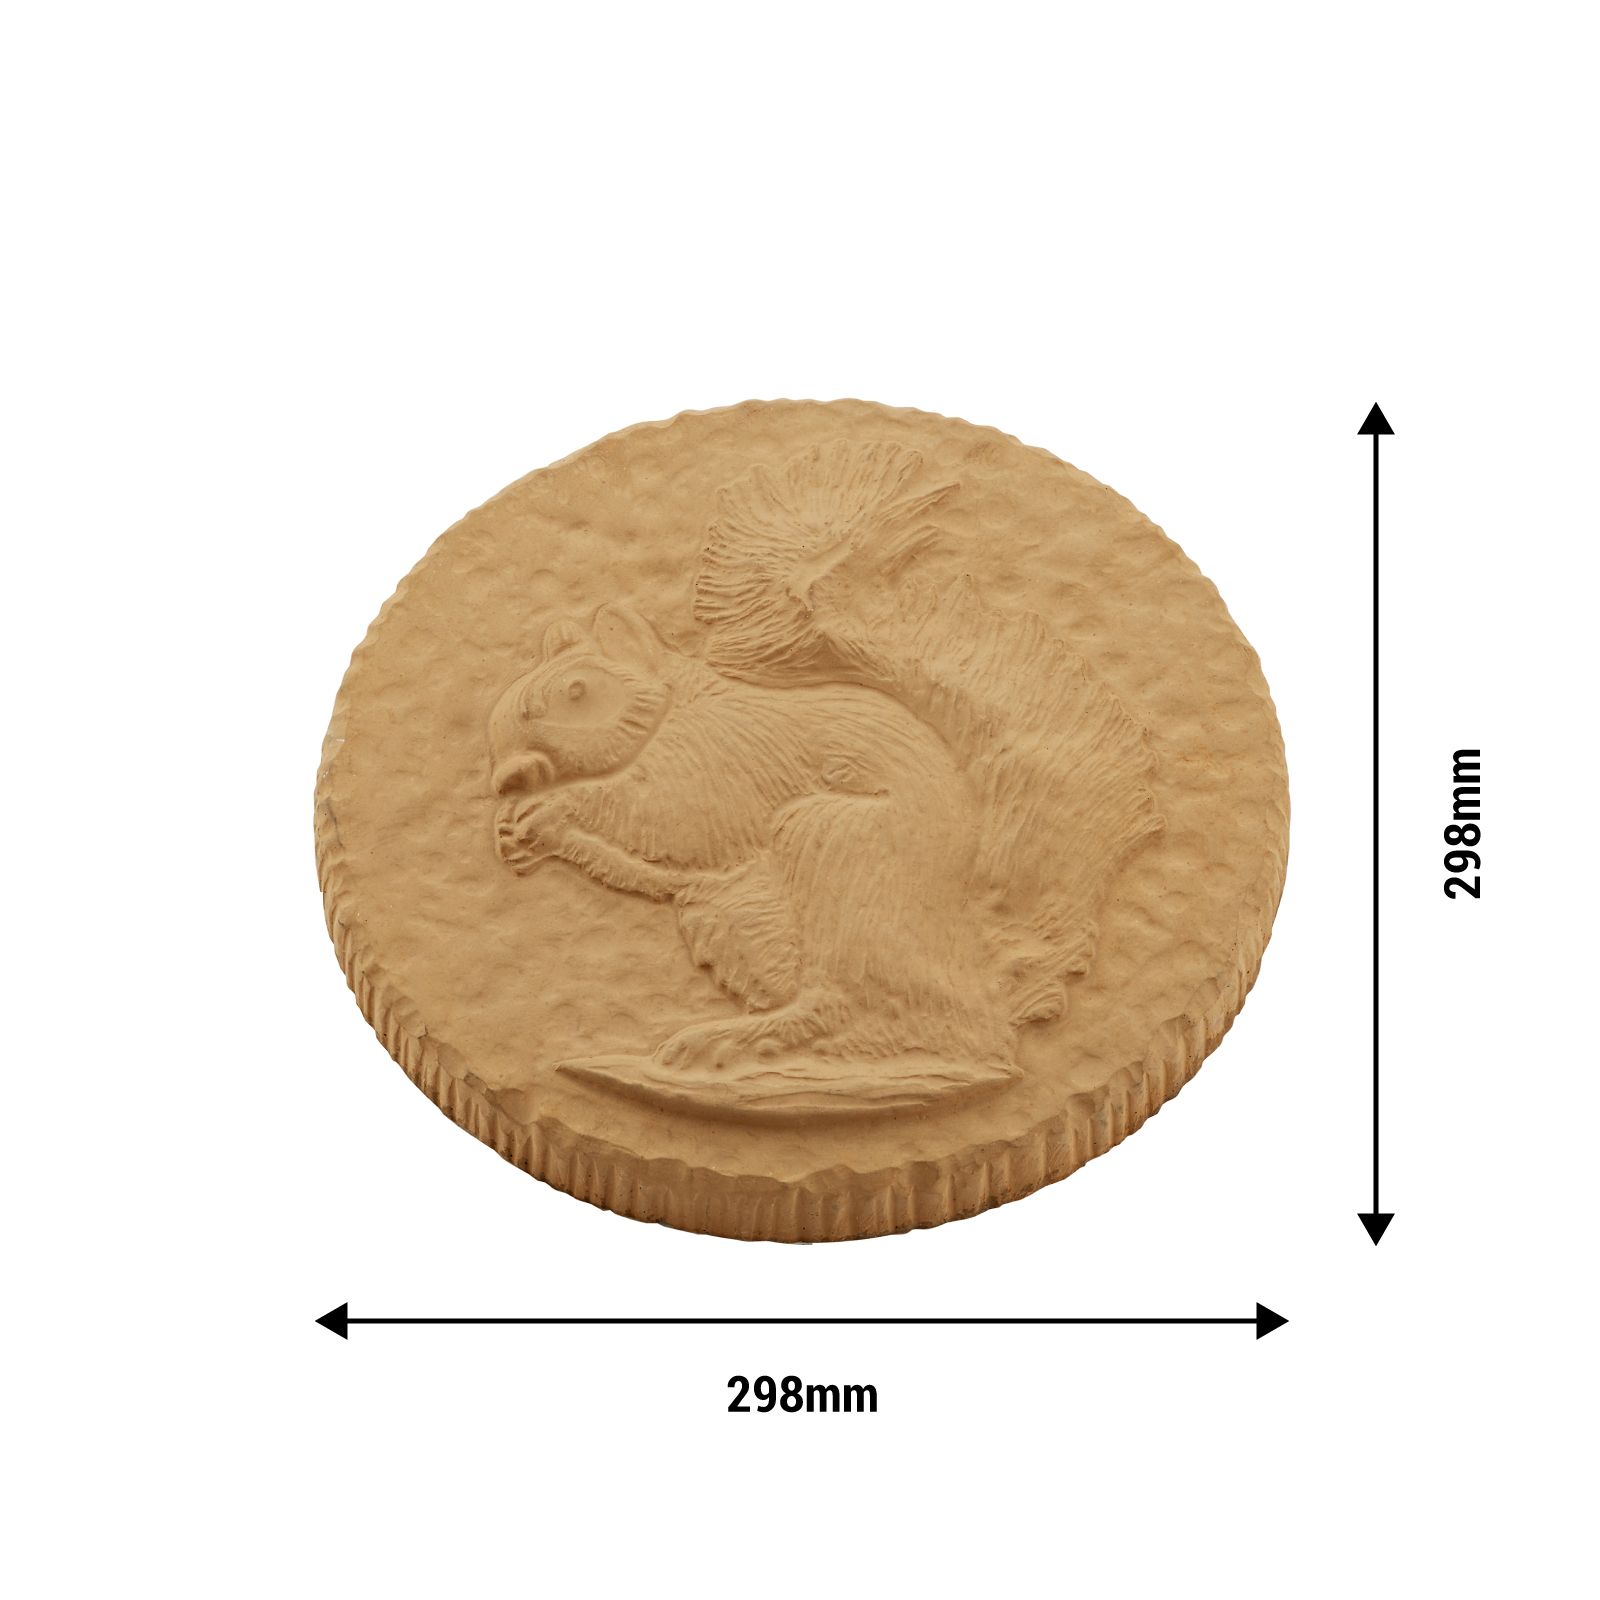 York Gold Single size Squirrel Stepping stone 0.07m²